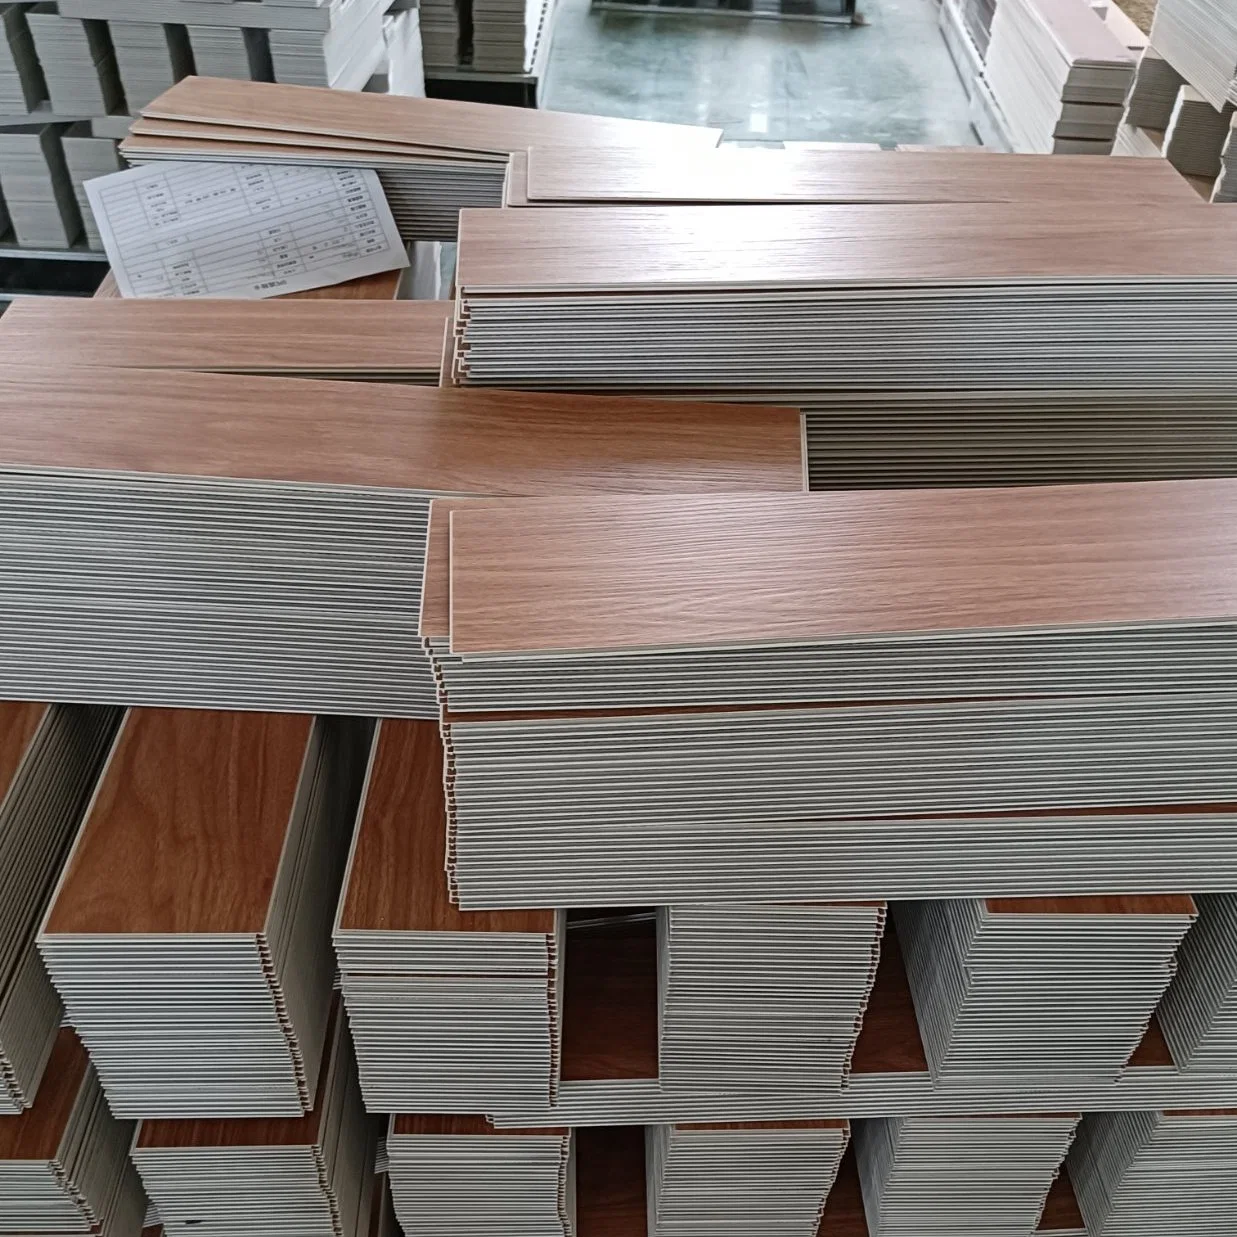 Commercial/Domestic Eco Flooring Tile/Spc Vinyl Flooring/PVC Tile/Vinyl Flooring/Spc Flooring/Floor Tile/Laminate Flooring for Building Material/Company Room